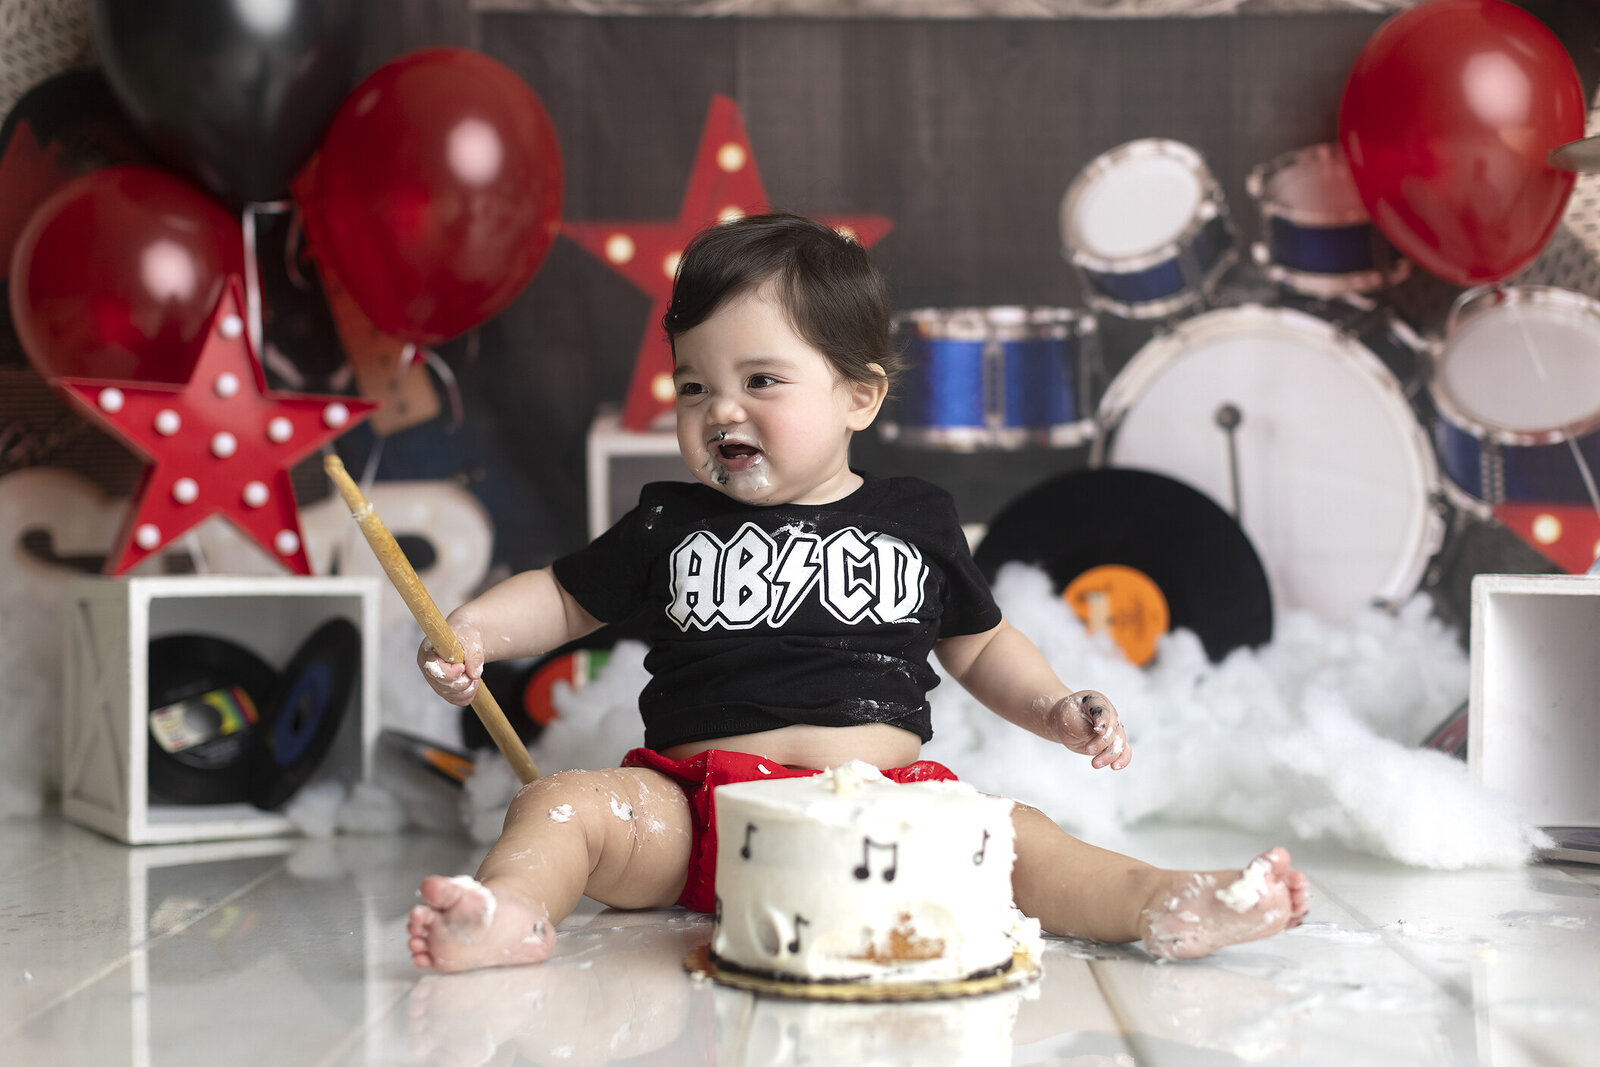 Boy at rock and roll cake smash holding drum stick